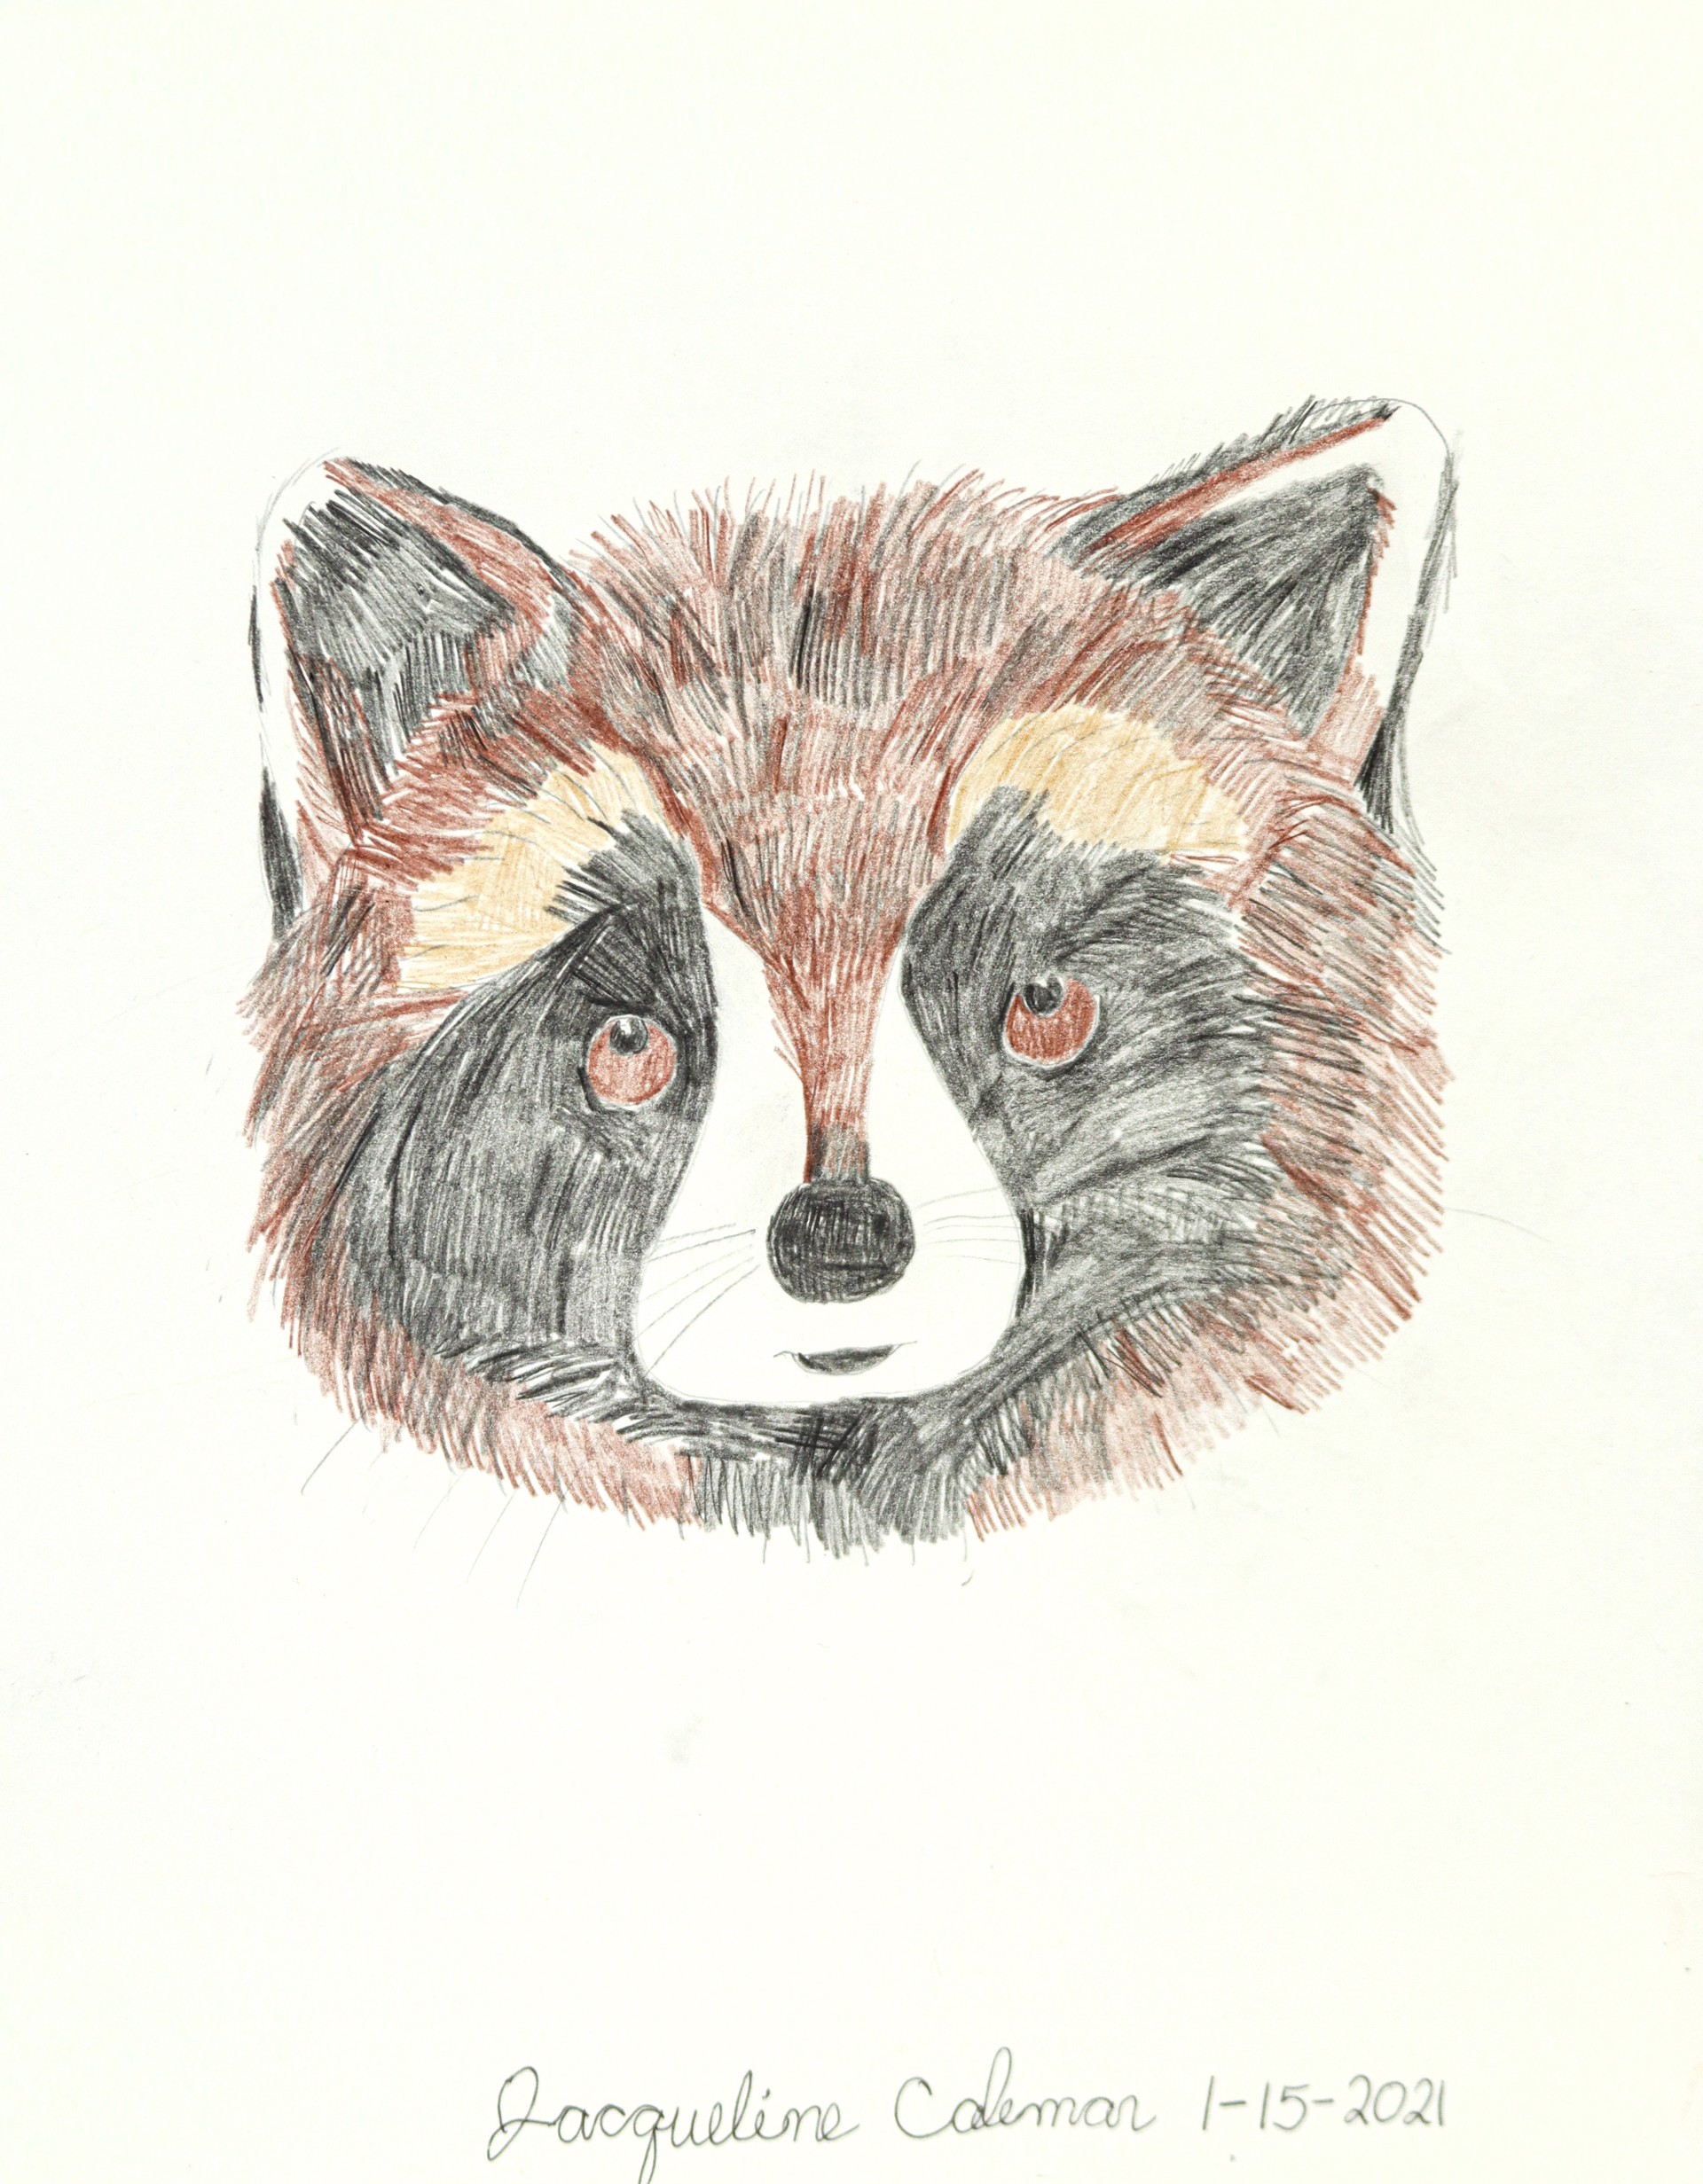 Raccoon by Jacqueline Coleman